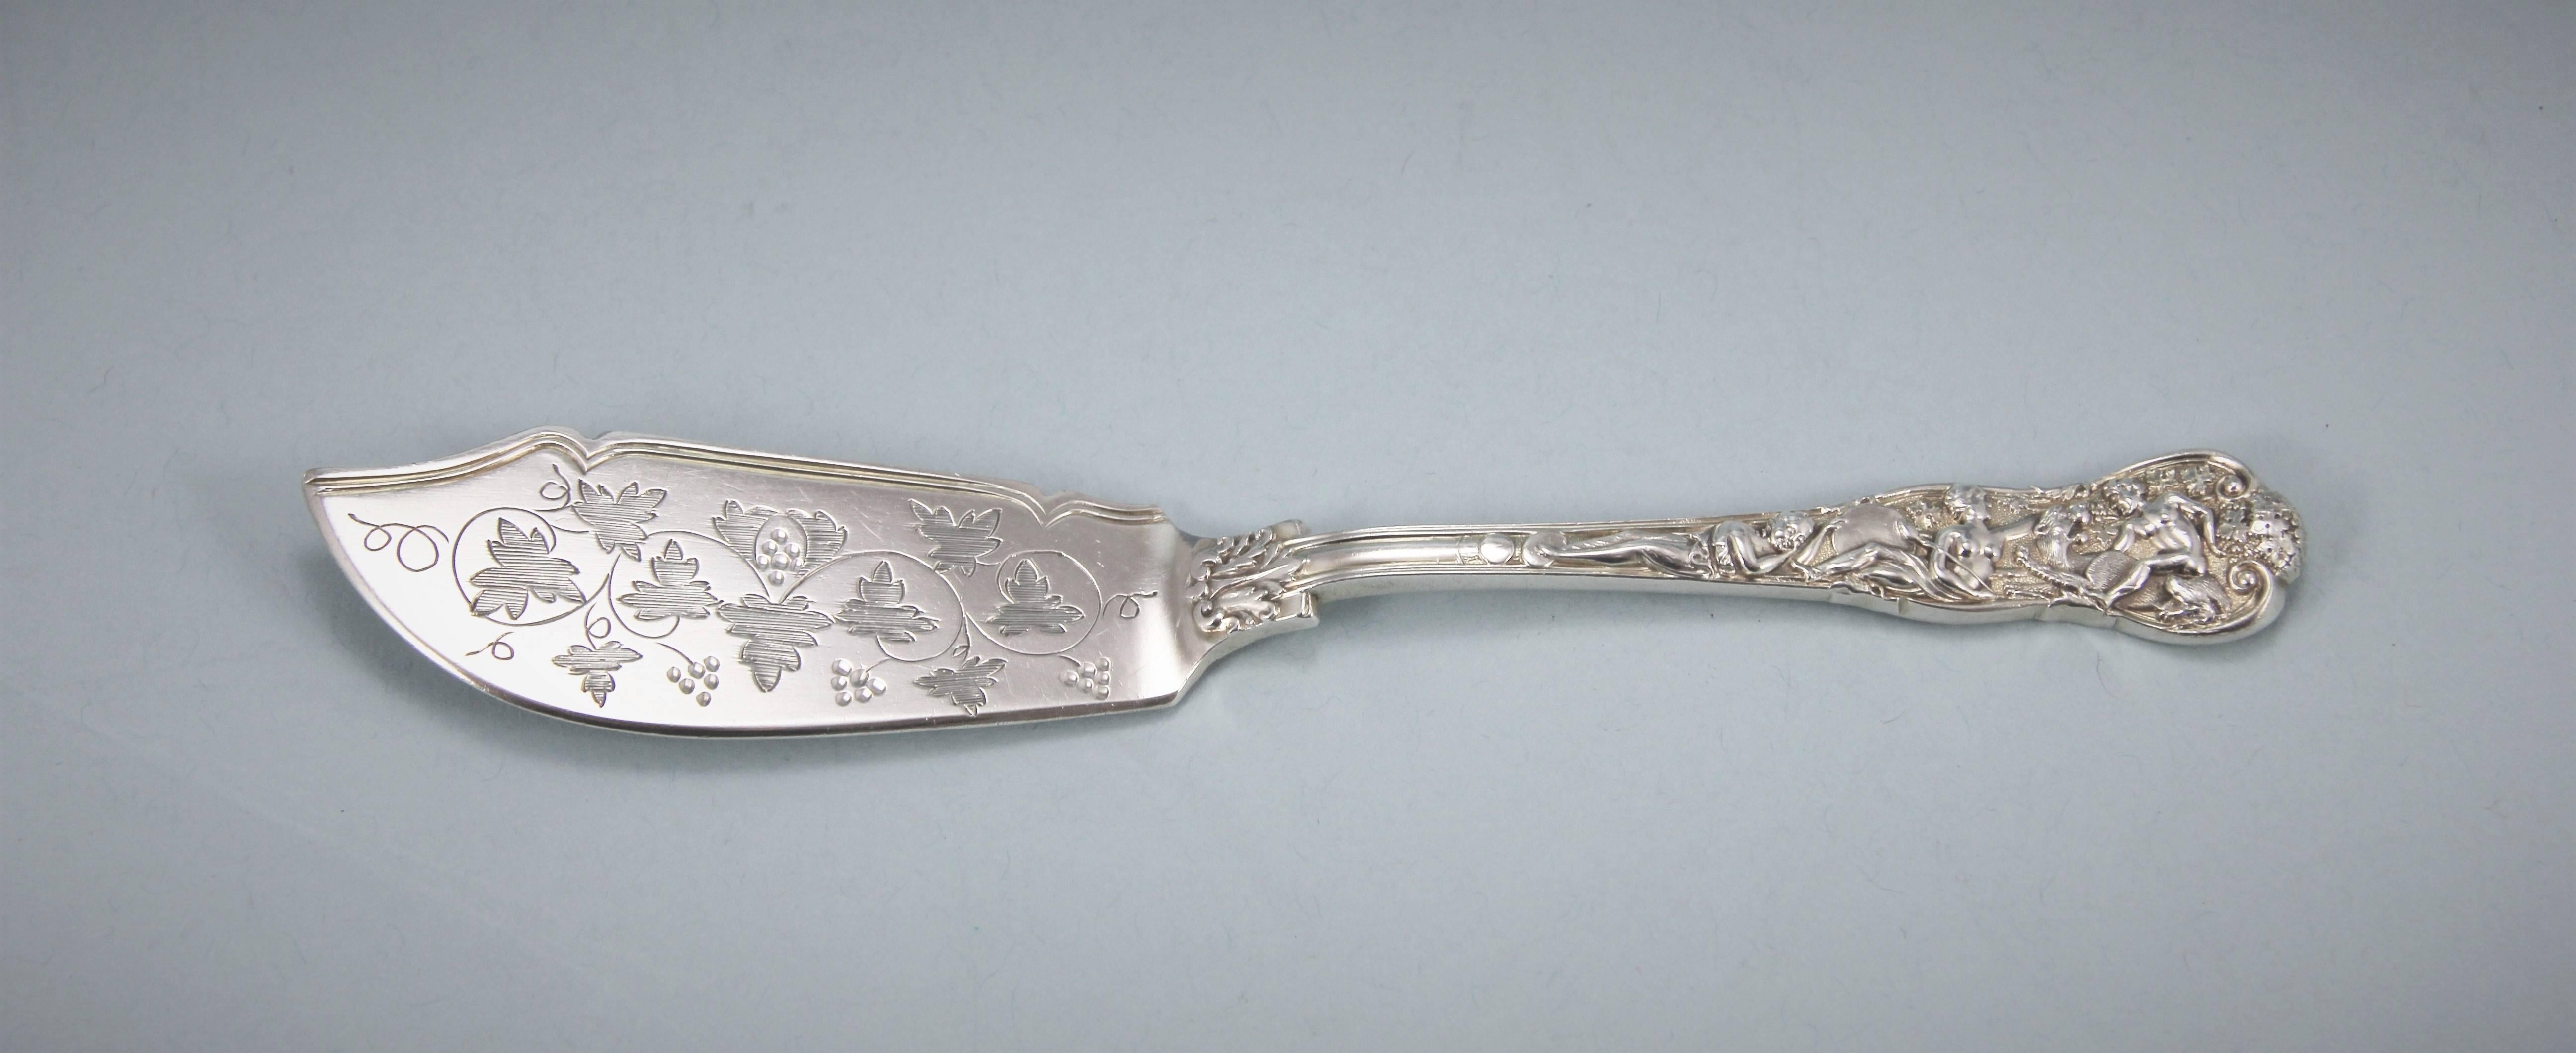 Highly decorative Victorian sterling silver Bacchanalian pattern butter knife. 
Makers: Lias Brothers - Henry John & Henry John Lias, London, 1869. 

The blade is decorated on the front with bright cut vine leaves and bunches of grapes and the